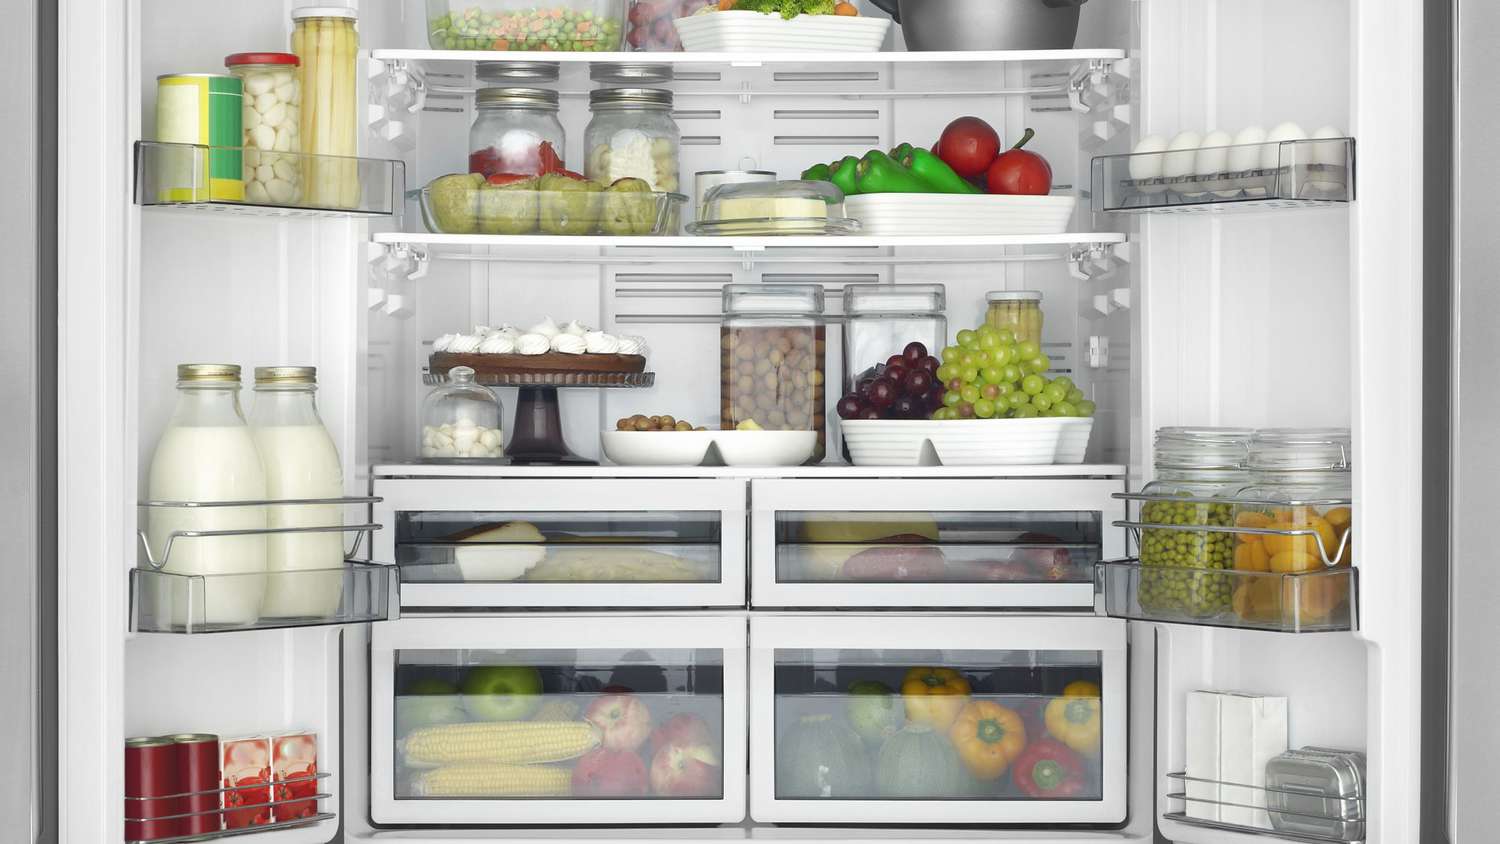 How To Store Food In The Refrigerator